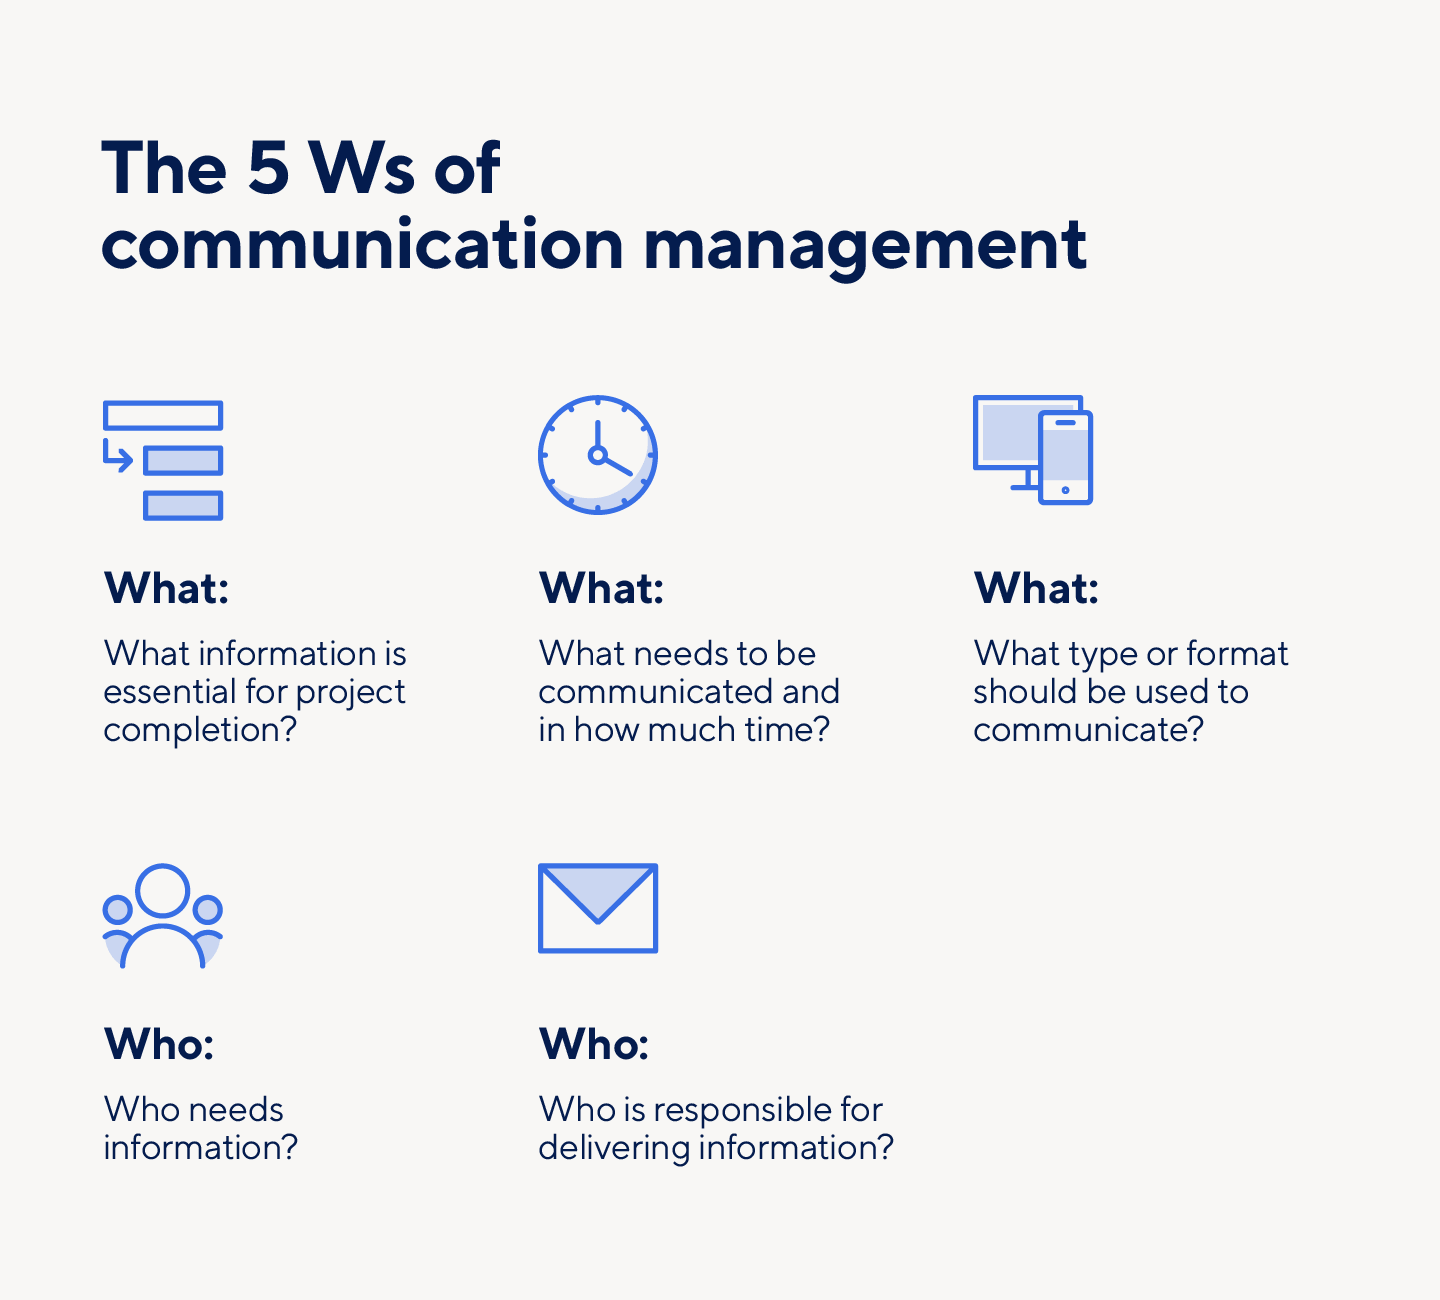 Communication management uses 5 W's to determine who needs what information.